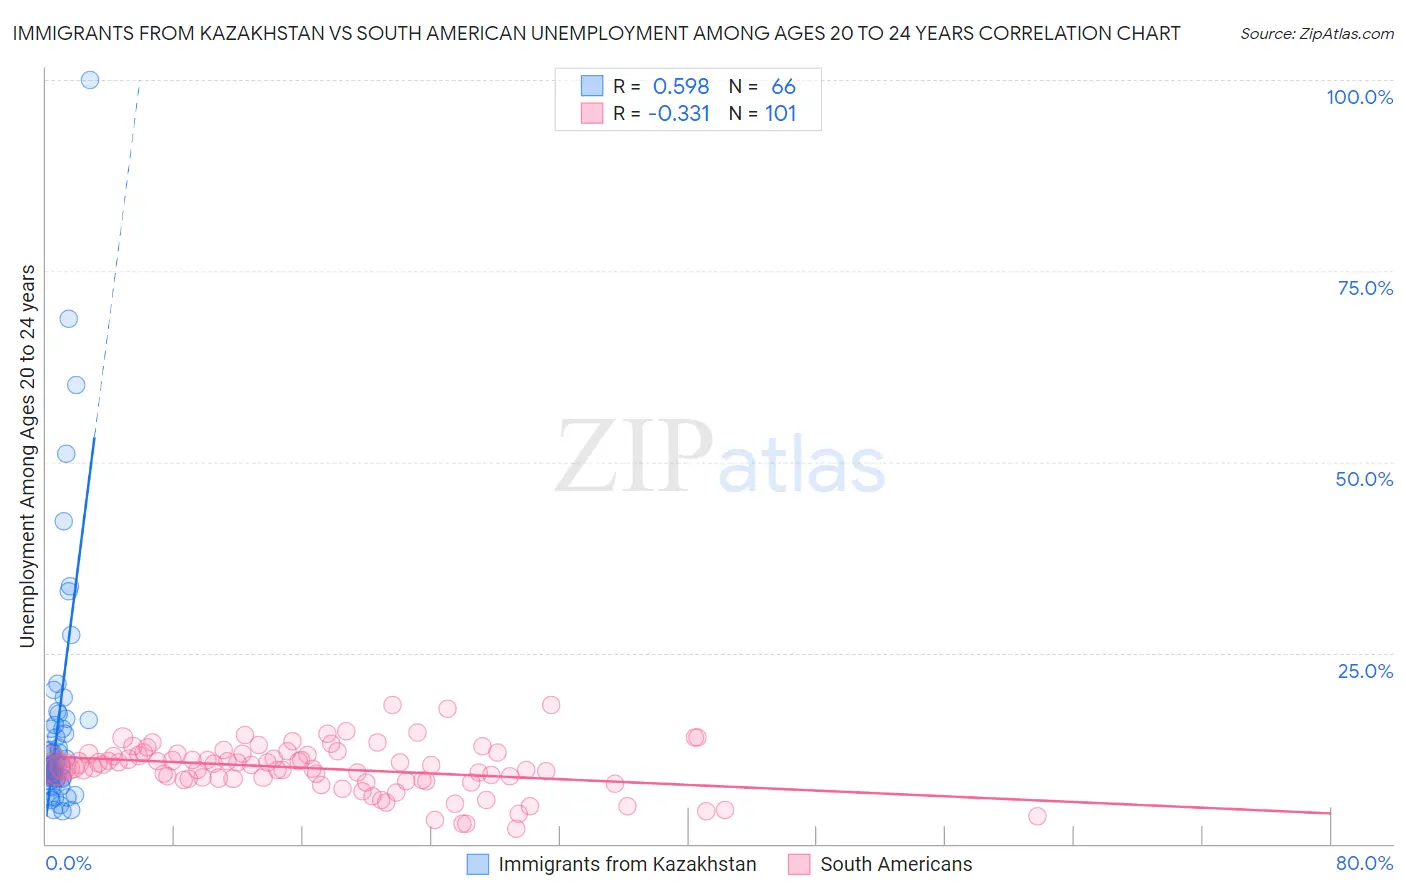 Immigrants from Kazakhstan vs South American Unemployment Among Ages 20 to 24 years